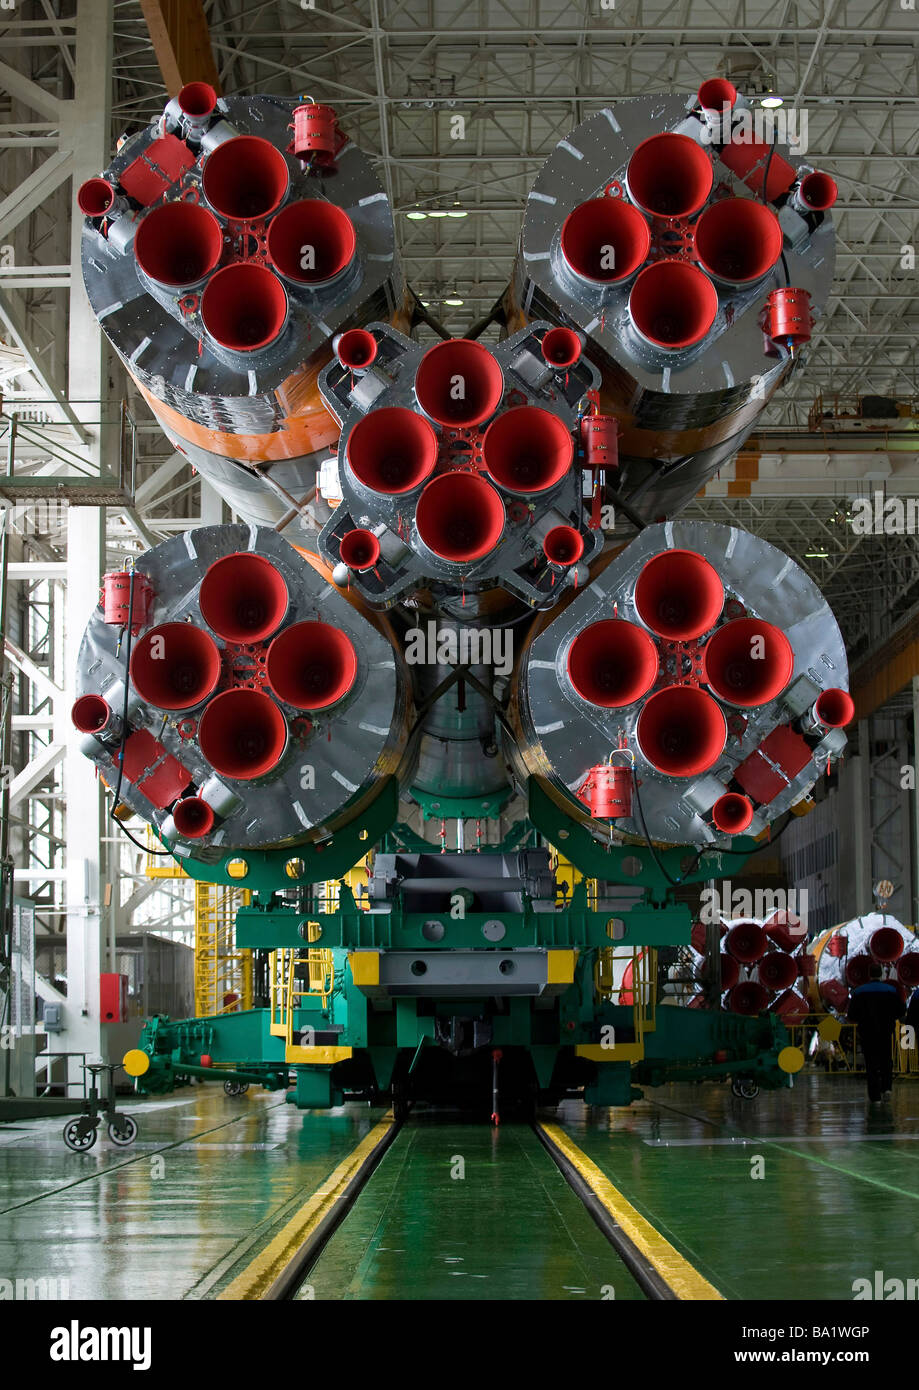 The boosters of the Soyuz TMA-14 spacecraft. Stock Photo